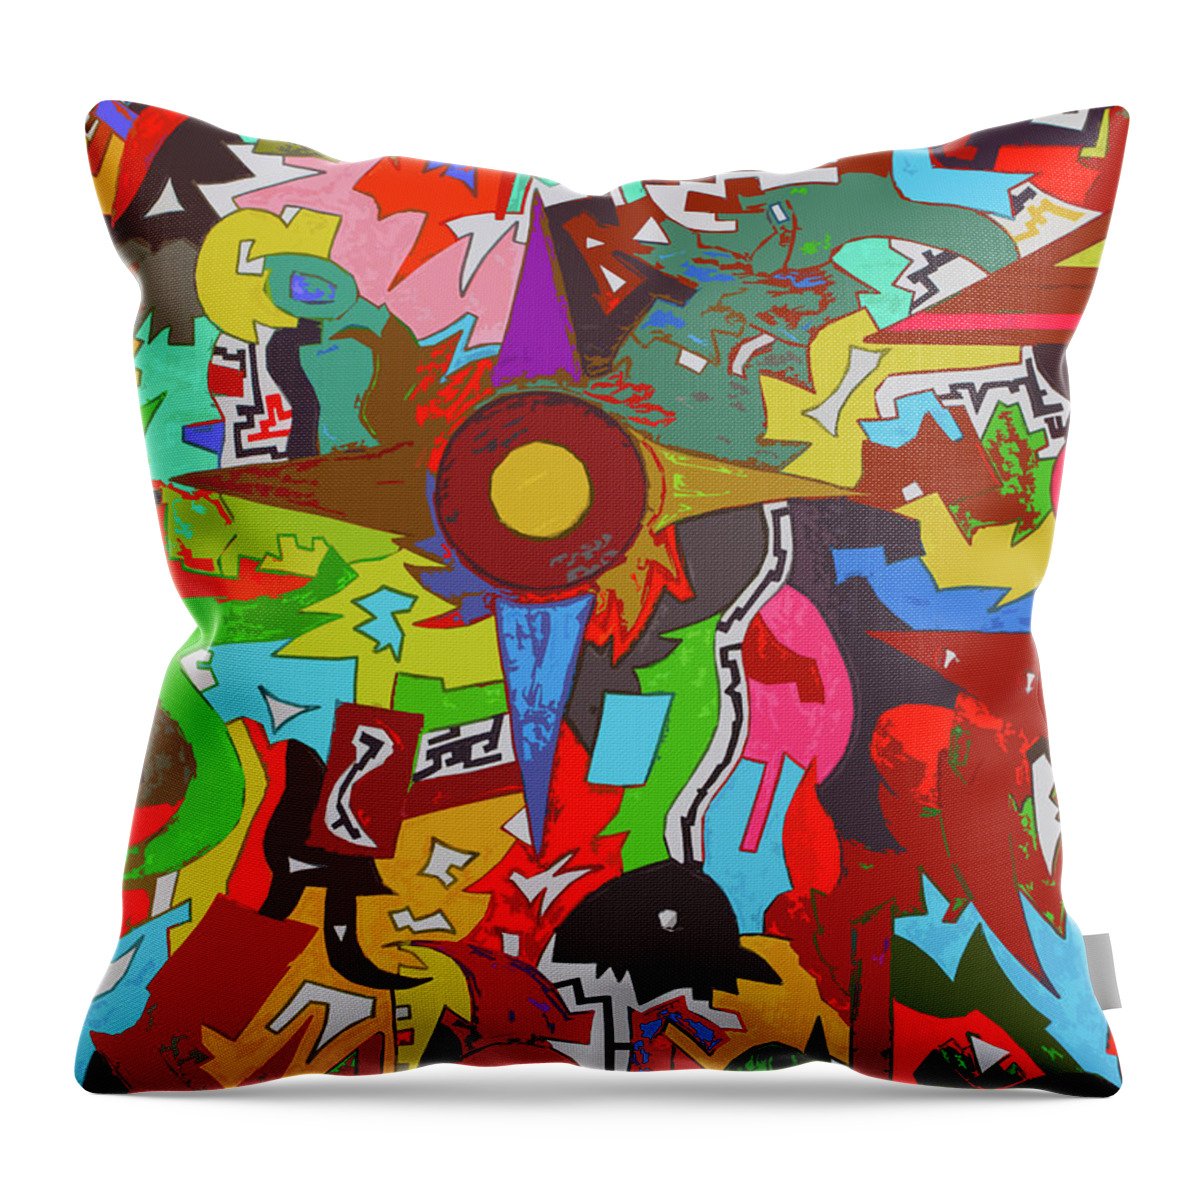 Cubism Throw Pillow featuring the painting Abstract Aztec Calendar by Robert Margetts